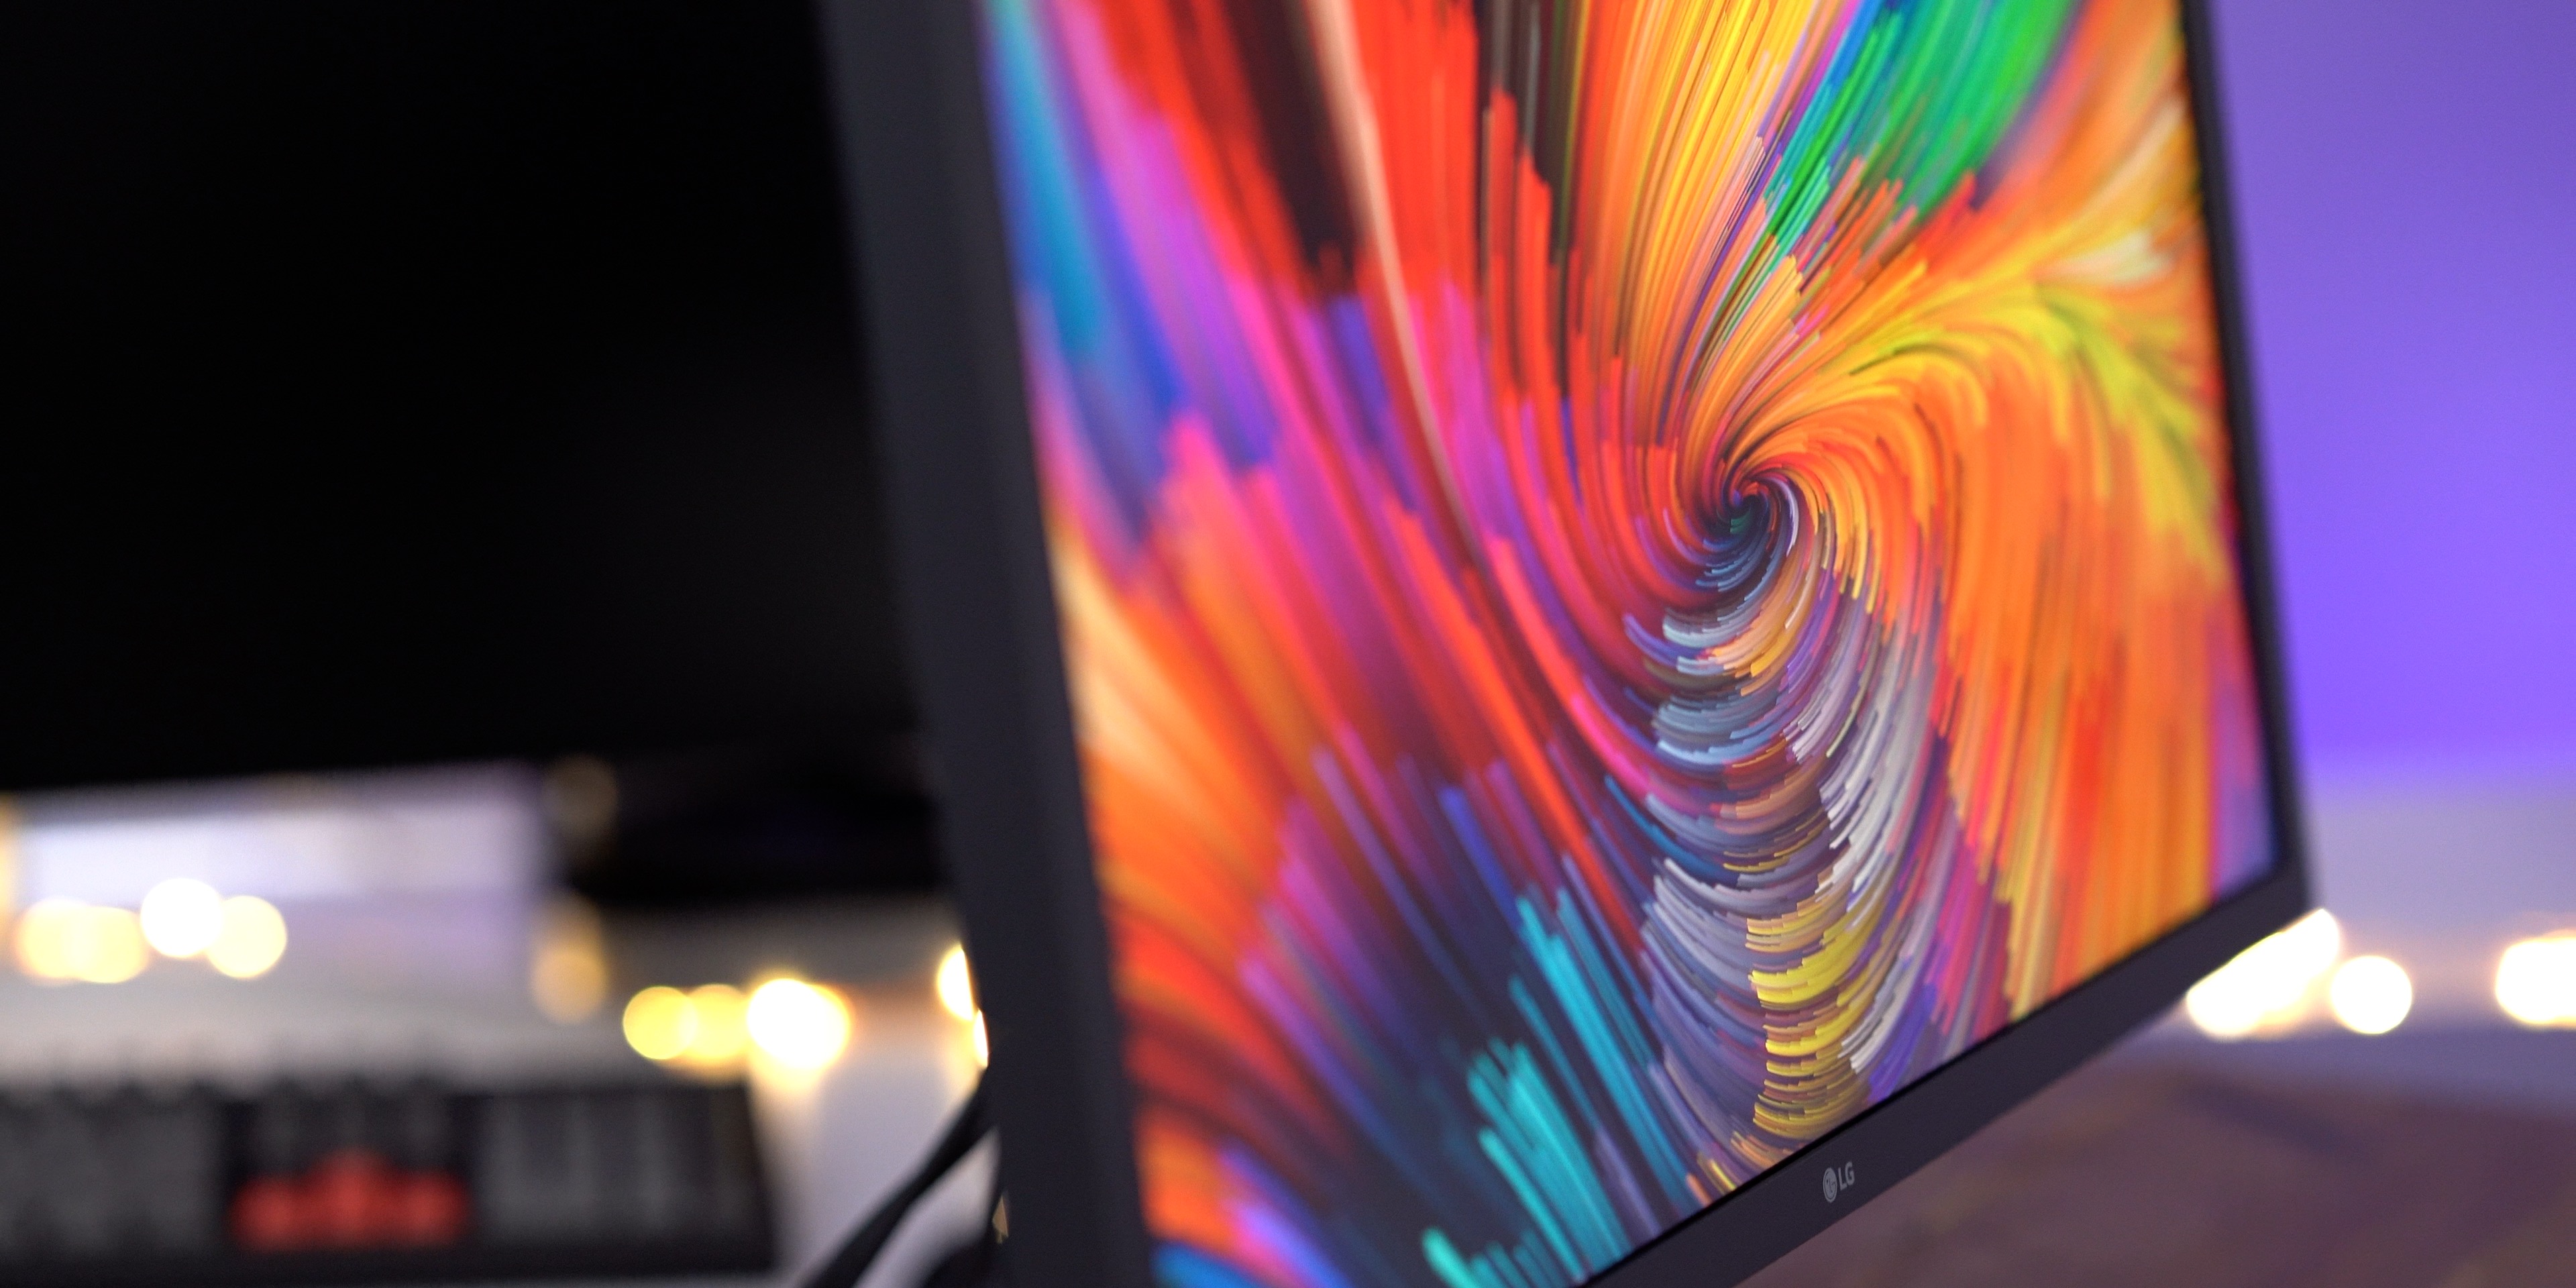 23.7-inch LG UltraFine 4K Display viewing angle IPS